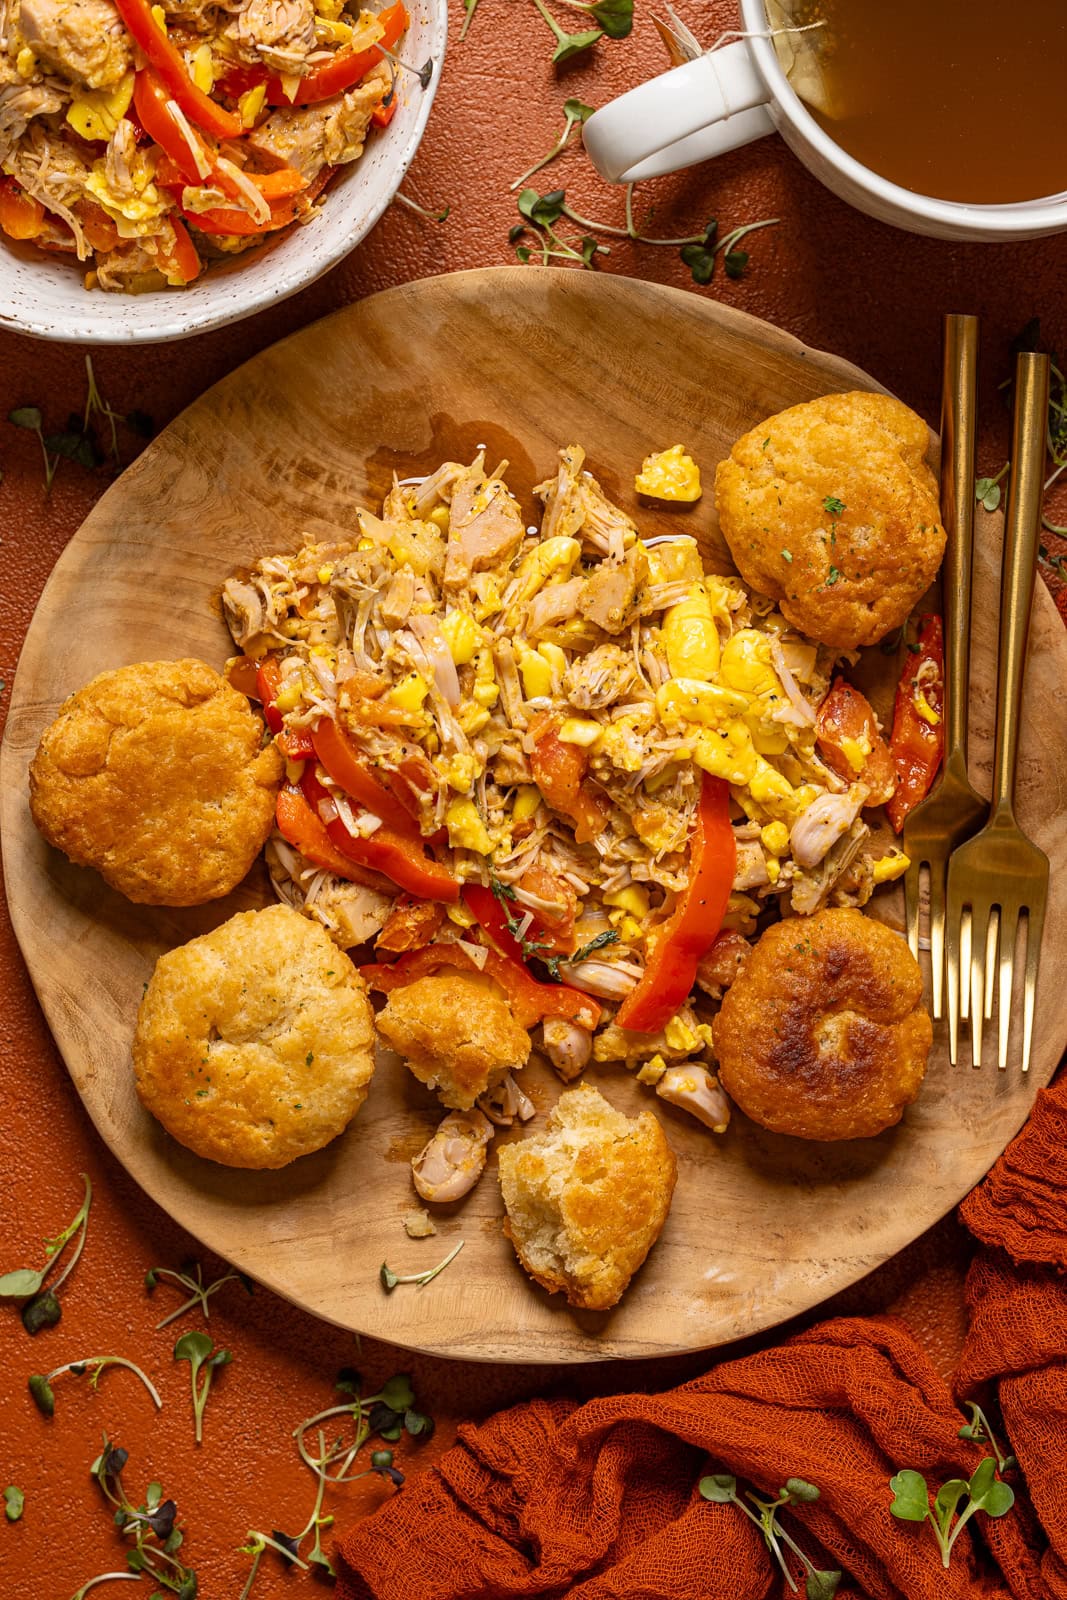 Ackee and saltfish with dumplings on a wooden plate with a fork and tea.